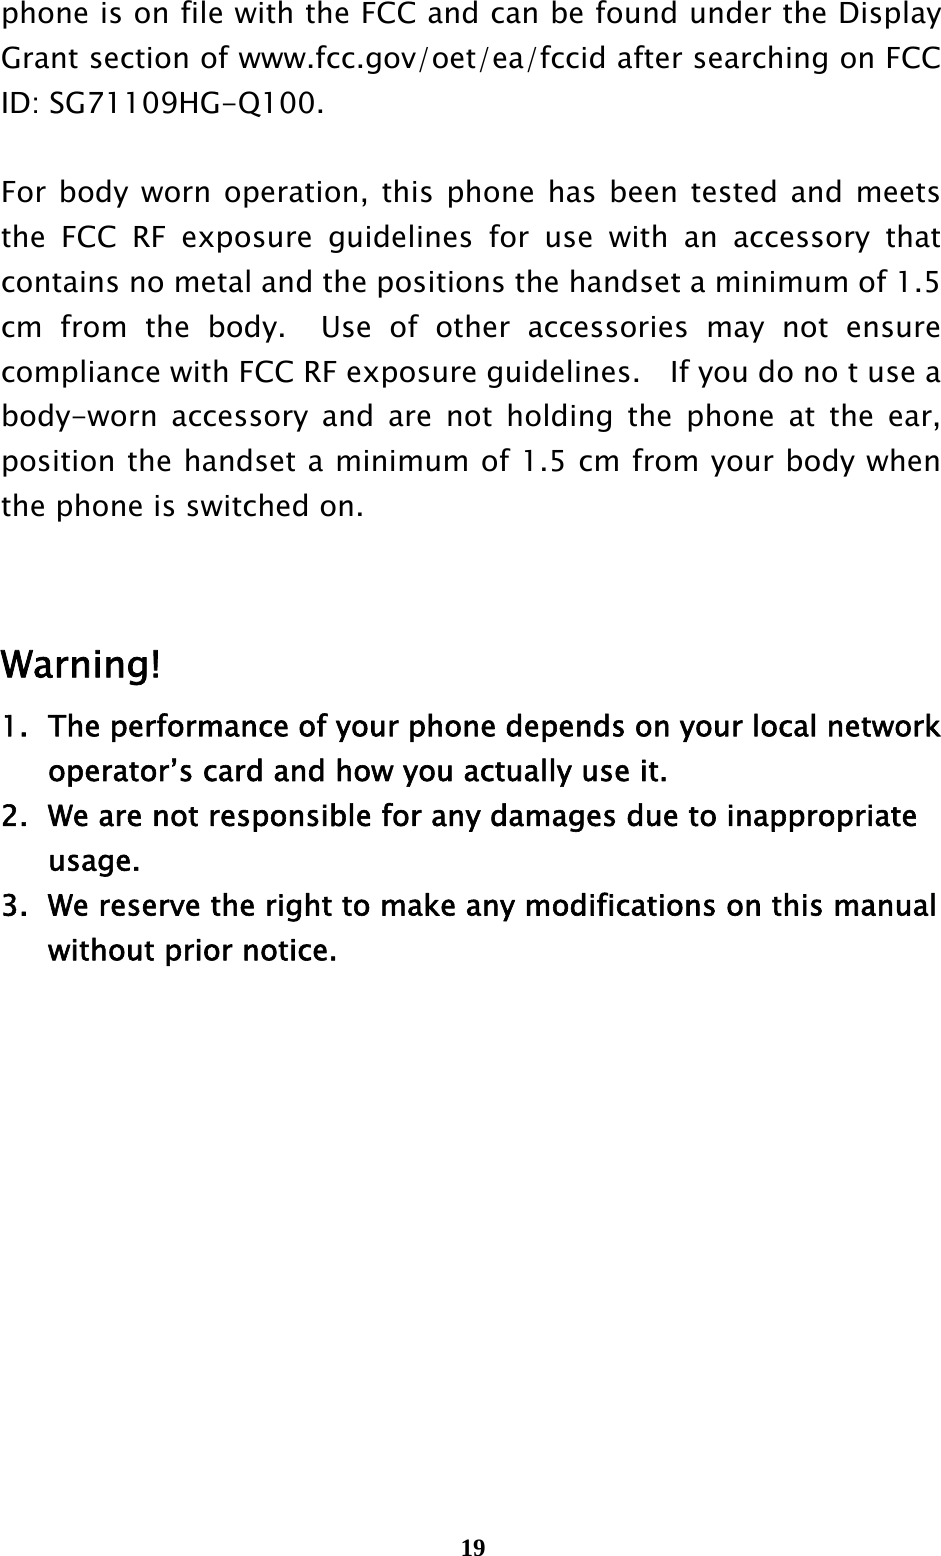  19phone is on file with the FCC and can be found under the Display Grant section of www.fcc.gov/oet/ea/fccid after searching on FCC ID: SG71109HG-Q100.  For body worn operation, this phone has been tested and meets the FCC RF exposure guidelines for use with an accessory that contains no metal and the positions the handset a minimum of 1.5 cm from the body.  Use of other accessories may not ensure compliance with FCC RF exposure guidelines.    If you do no t use a body-worn accessory and are not holding the phone at the ear, position the handset a minimum of 1.5 cm from your body when the phone is switched on.   Warning! 1.  The performance of your phone depends on your local network     operator’s card and how you actually use it. 2.   We are not responsible for any damages due to inappropriate    usage.  3.   We reserve the right to make any modifications on this manual     without prior notice. 